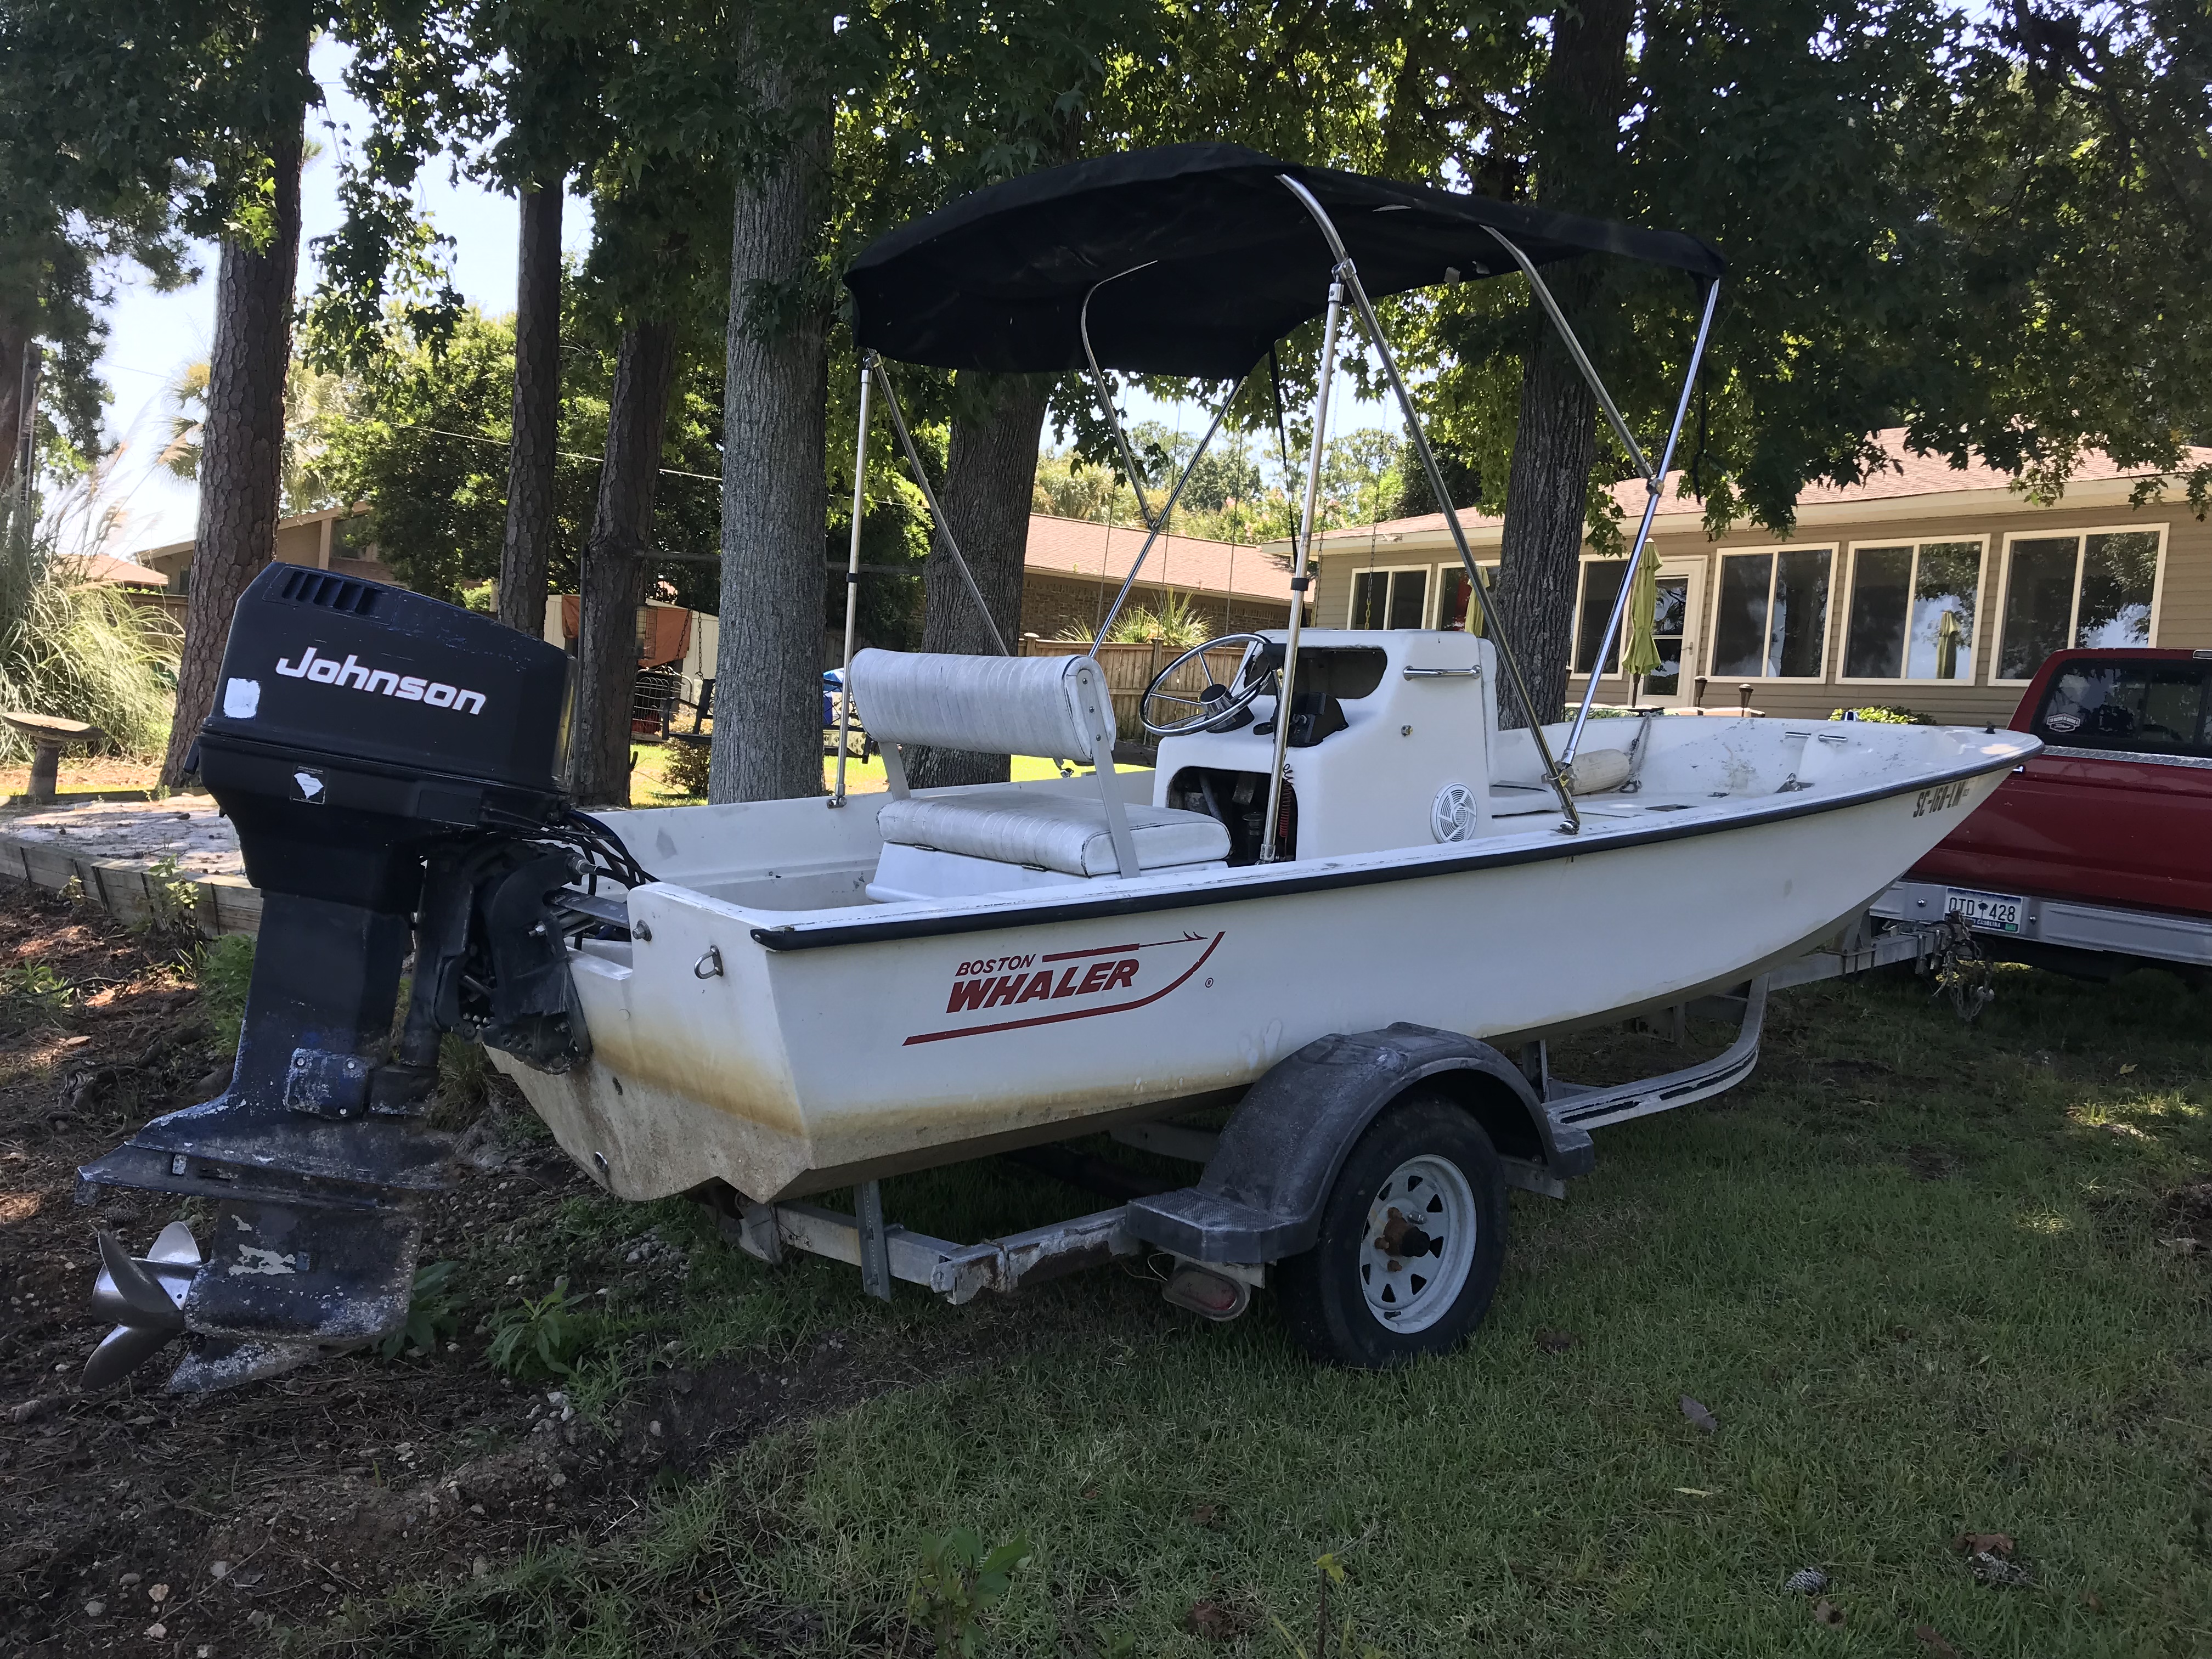 1977 17 foot Boston Whaler Newport Power boat for sale in Chapin, SC - image 1 